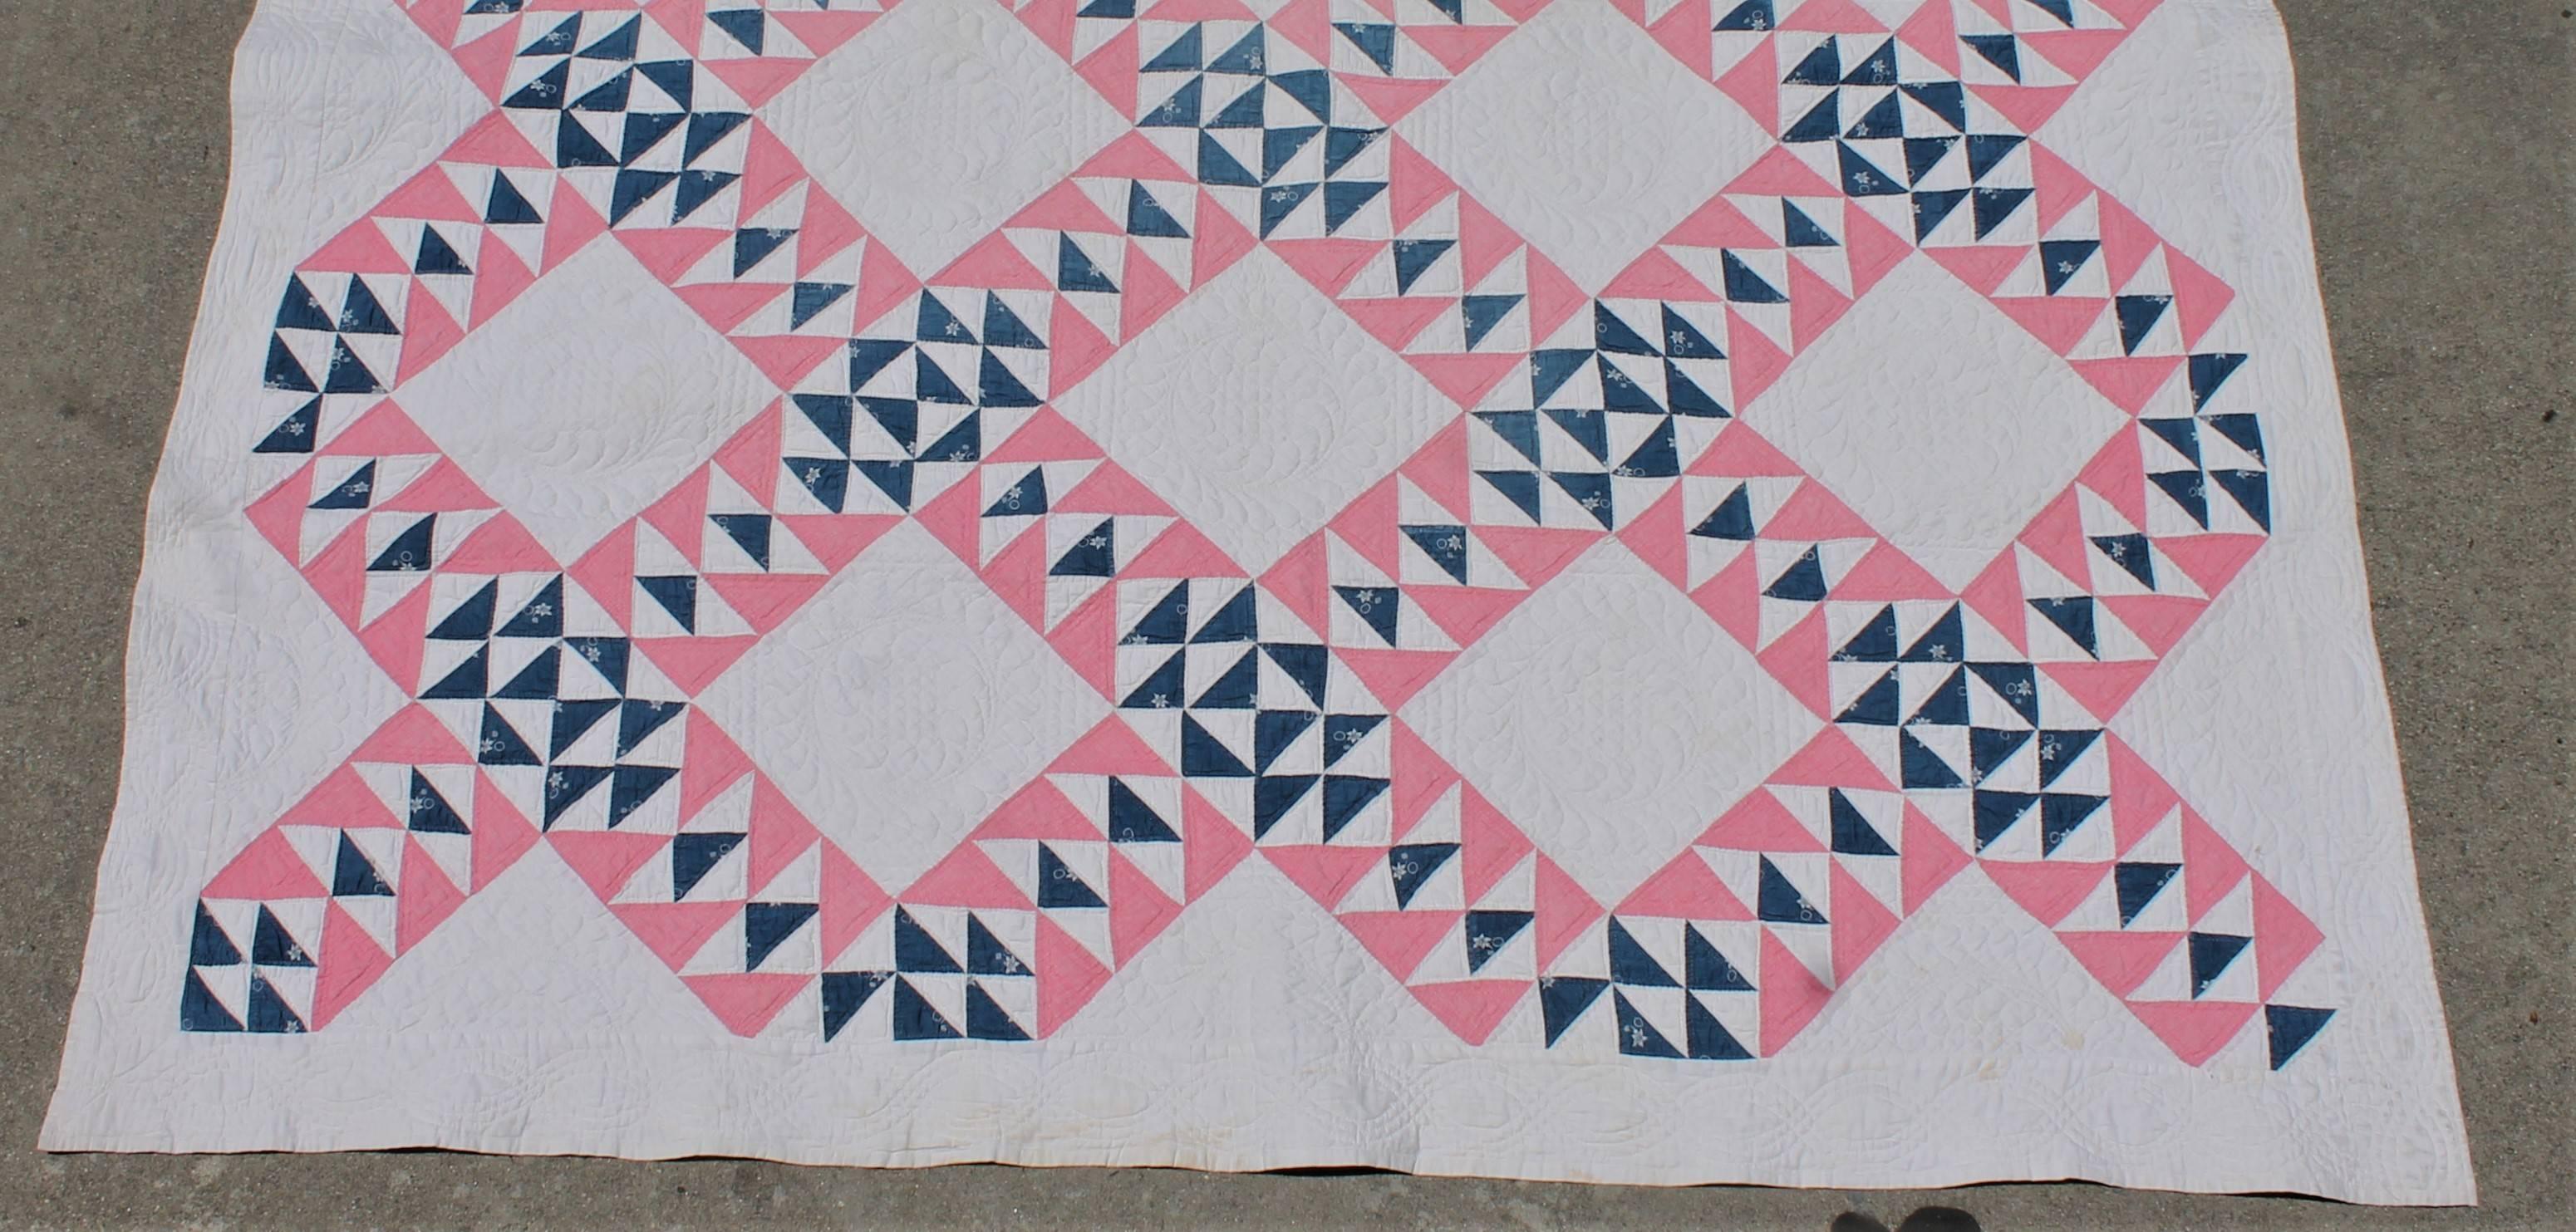 This amazing quilt has the most fantastic quilting and piecing. The quilt was dated in the 1870s but date is almost faded off after having it professionally cleaned It is very pristine with minor staining on the backside but nothing on the front